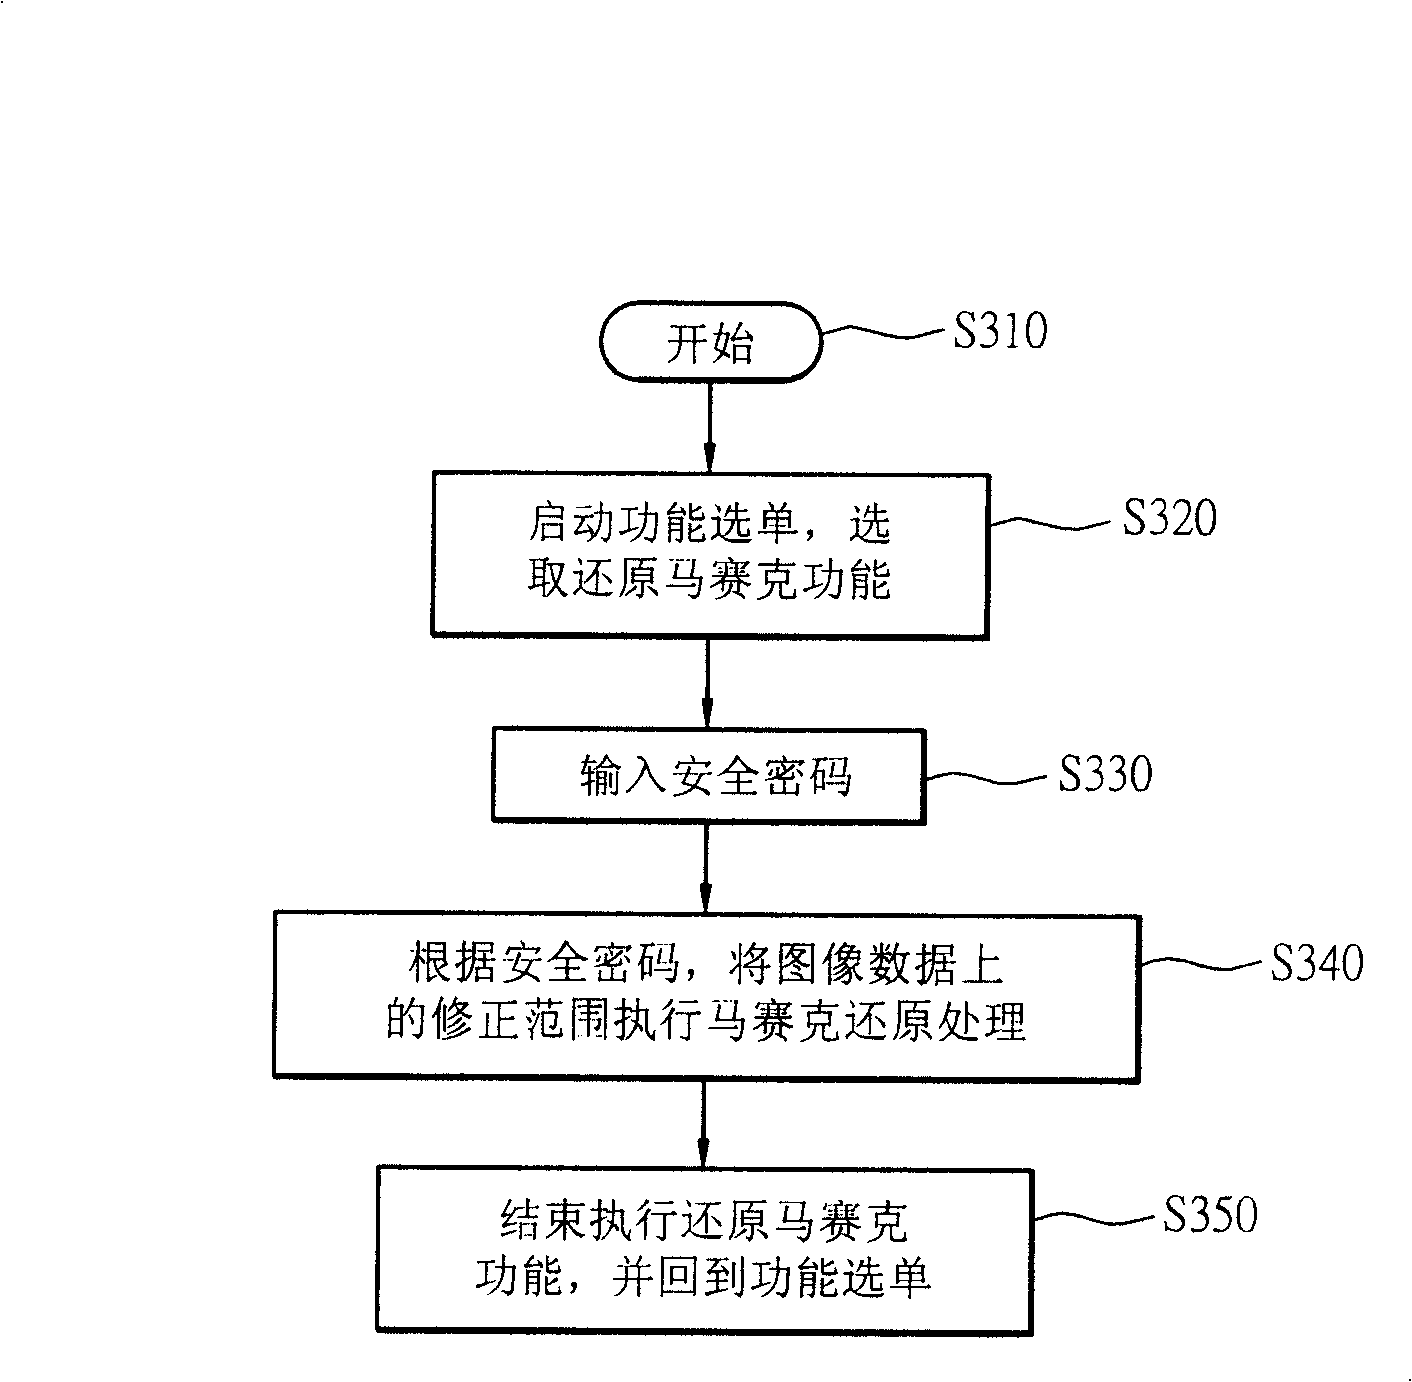 Mosaic process for digital camera as well as method for reducing mosaic process